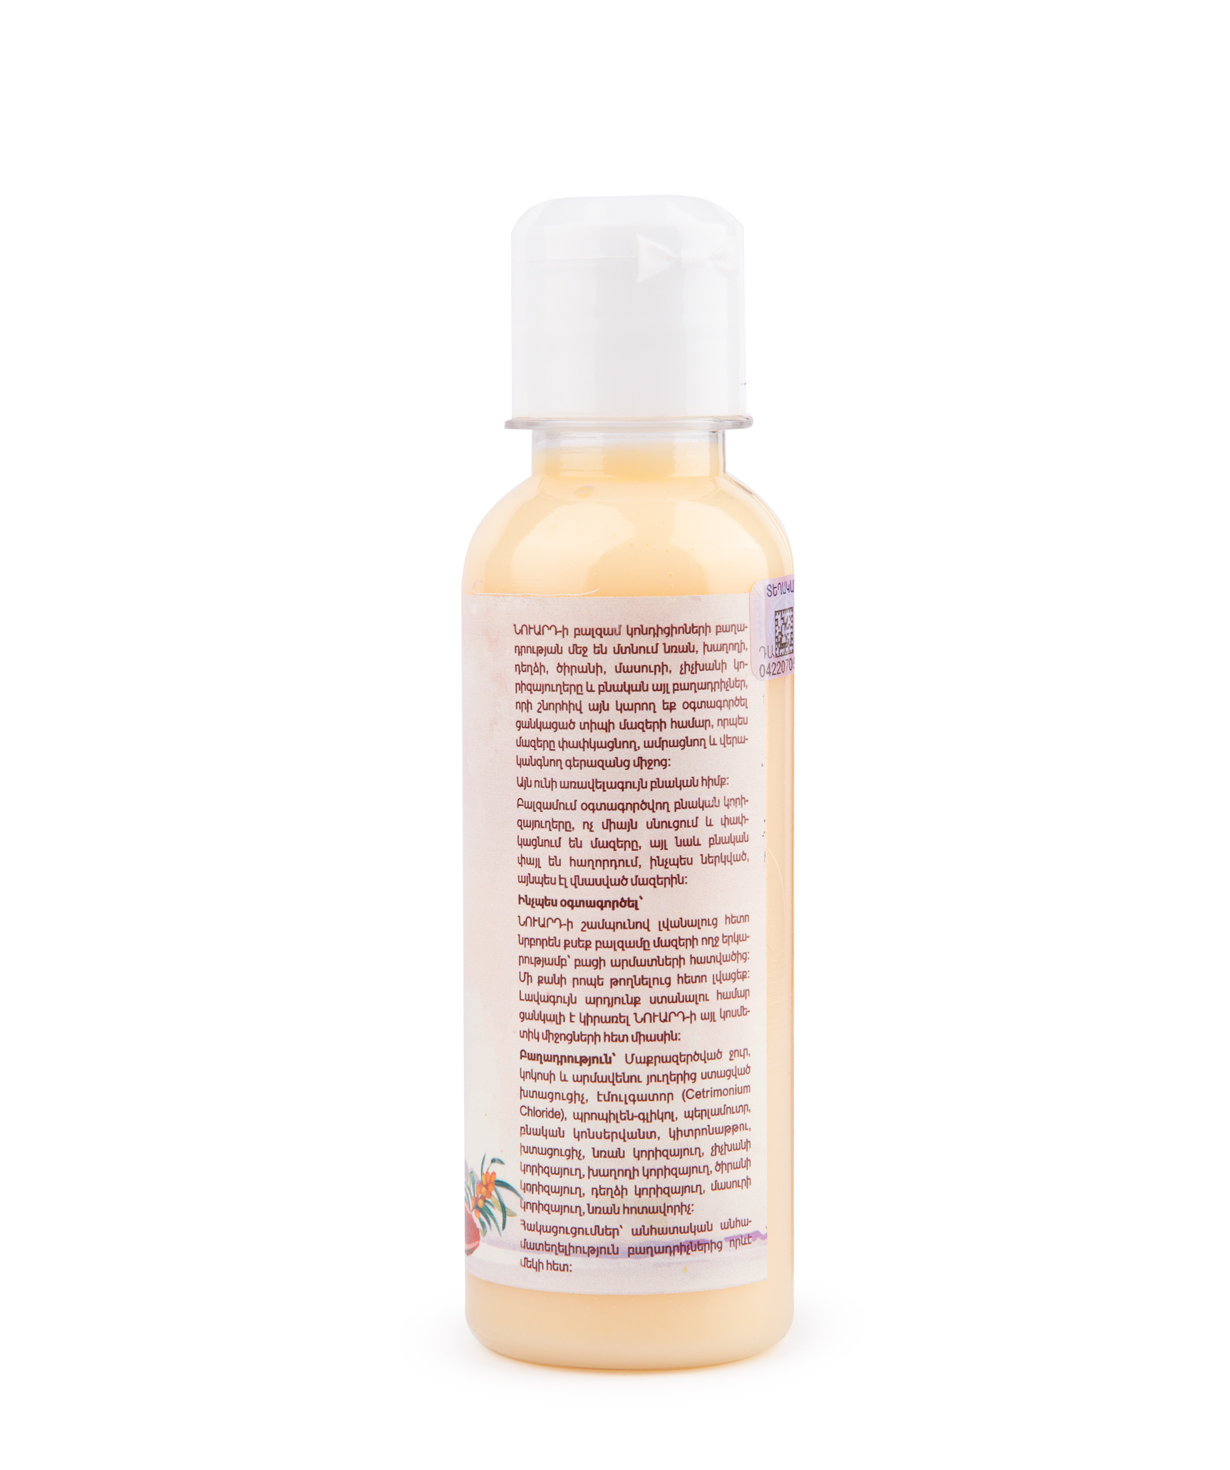 Hair balsam-conditioner made from 6 different kernels oil `Nuard`